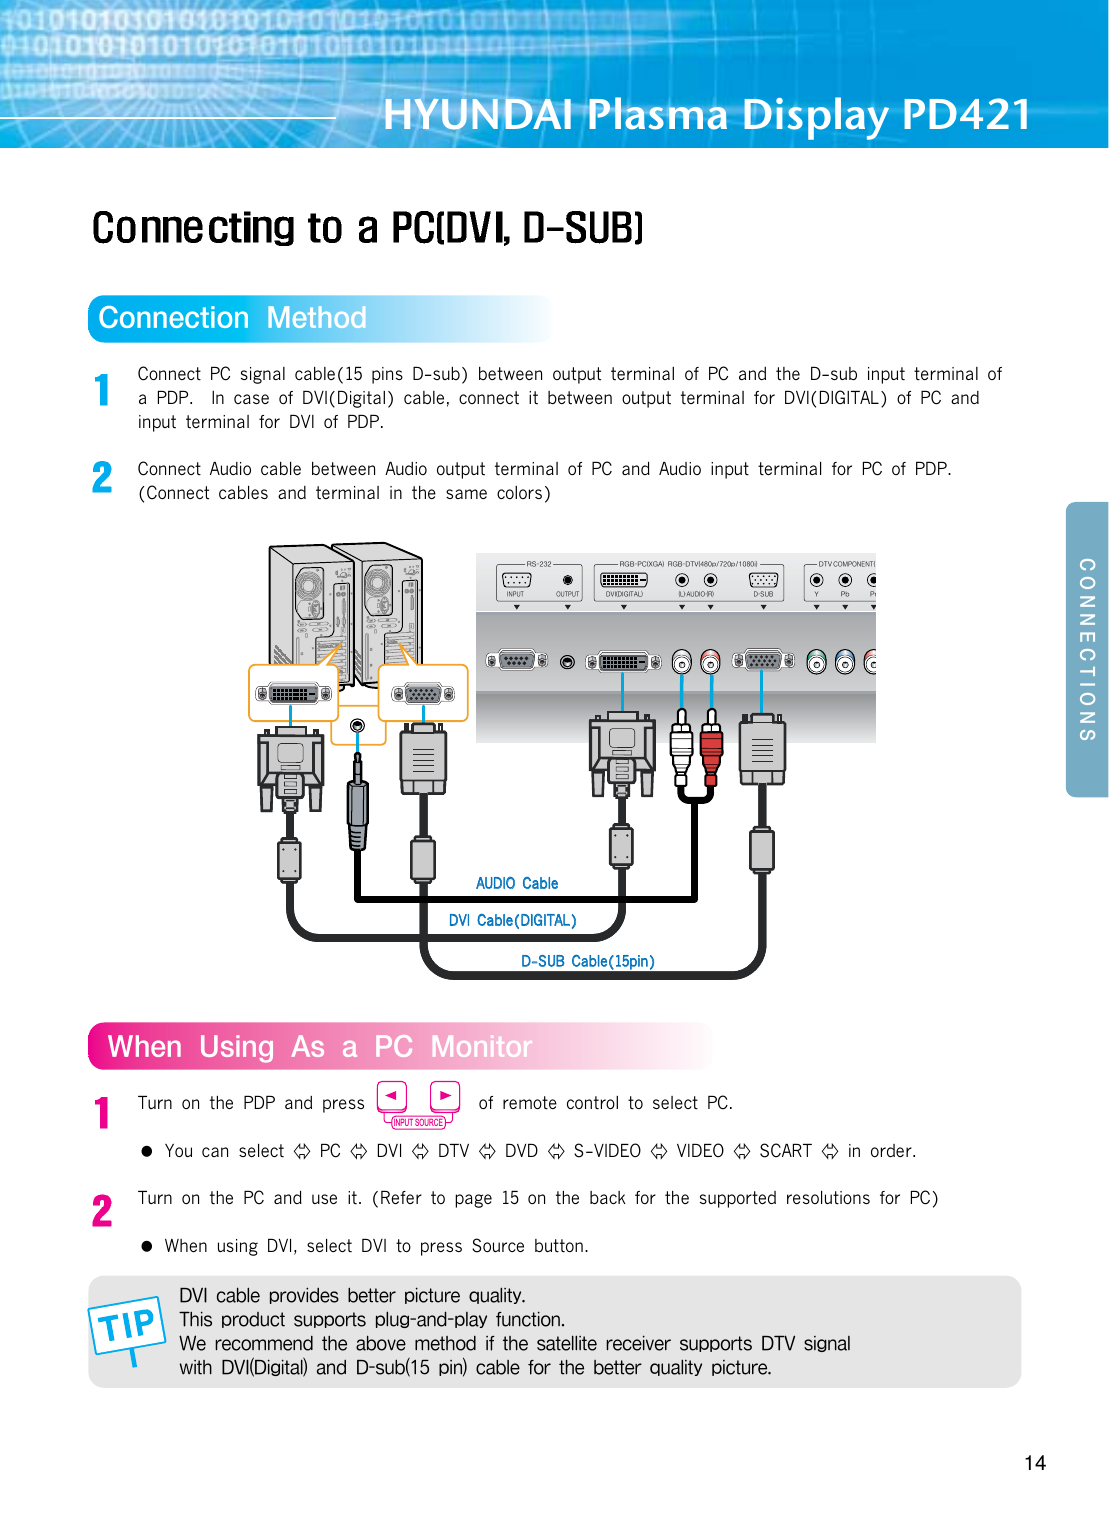 HYUNDAI Plasma Display PD42114+766-+&lt;176;+WVVMK\QWV5M\PWLConnect PC signal cable(15 pins D-sub) between output terminal of PC and the D-sub input terminal ofa PDP.  In case of DVI(Digital) cable, connect it between output terminal for DVI(DIGITAL) of PC andinput terminal for DVI of PDP. Connect Audio cable between Audio output terminal of PC and Audio input terminal for PC of PDP.(Connect cables and terminal in the same colors) ?PMV=[QVO)[I8+5WVQ\WZTurn on the PDP and press             of remote control to select PC.  ●You can select  PC  DVI  DTV  DVD  S-VIDEO  VIDEO  SCART  in order. Turn on the PC and use it. (Refer to page 15 on the back for the supported resolutions for PC) ●When using DVI, select DVI to press Source button. ,&gt;1KIJTMXZW^QLM[JM\\MZXQK\]ZMY]ITQ\a&lt;PQ[XZWL]K\[]XXWZ\[XT]OIVLXTIaN]VK\QWV?MZMKWUUMVL\PMIJW^MUM\PWLQN\PM[I\MTTQ\MZMKMQ^MZ[]XXWZ\[,&lt;&gt;[QOVIT_Q\P,&gt;1,QOQ\ITIVL,[]JXQVKIJTMNWZ\PMJM\\MZY]ITQ\aXQK\]ZMINPUT SOURCESOURCEMODEPIP ON/OFFSWAPSIZEPOSITIONA8J8ZႺၗໜဨ:/*8+@/):/*,&lt;&gt; XX Q,&lt;&gt;+75876-6&lt;:;,&gt;1,1/1&lt;)4 ,;=*168=&lt; 7=&lt;8=&lt;4)=,17:AAUUDDIIOOCCaabblleeDD--SSUUBB  CCaabbllee((1155ppiinn))DDVVII  CCaabbllee((DDIIGGIITTAALL))